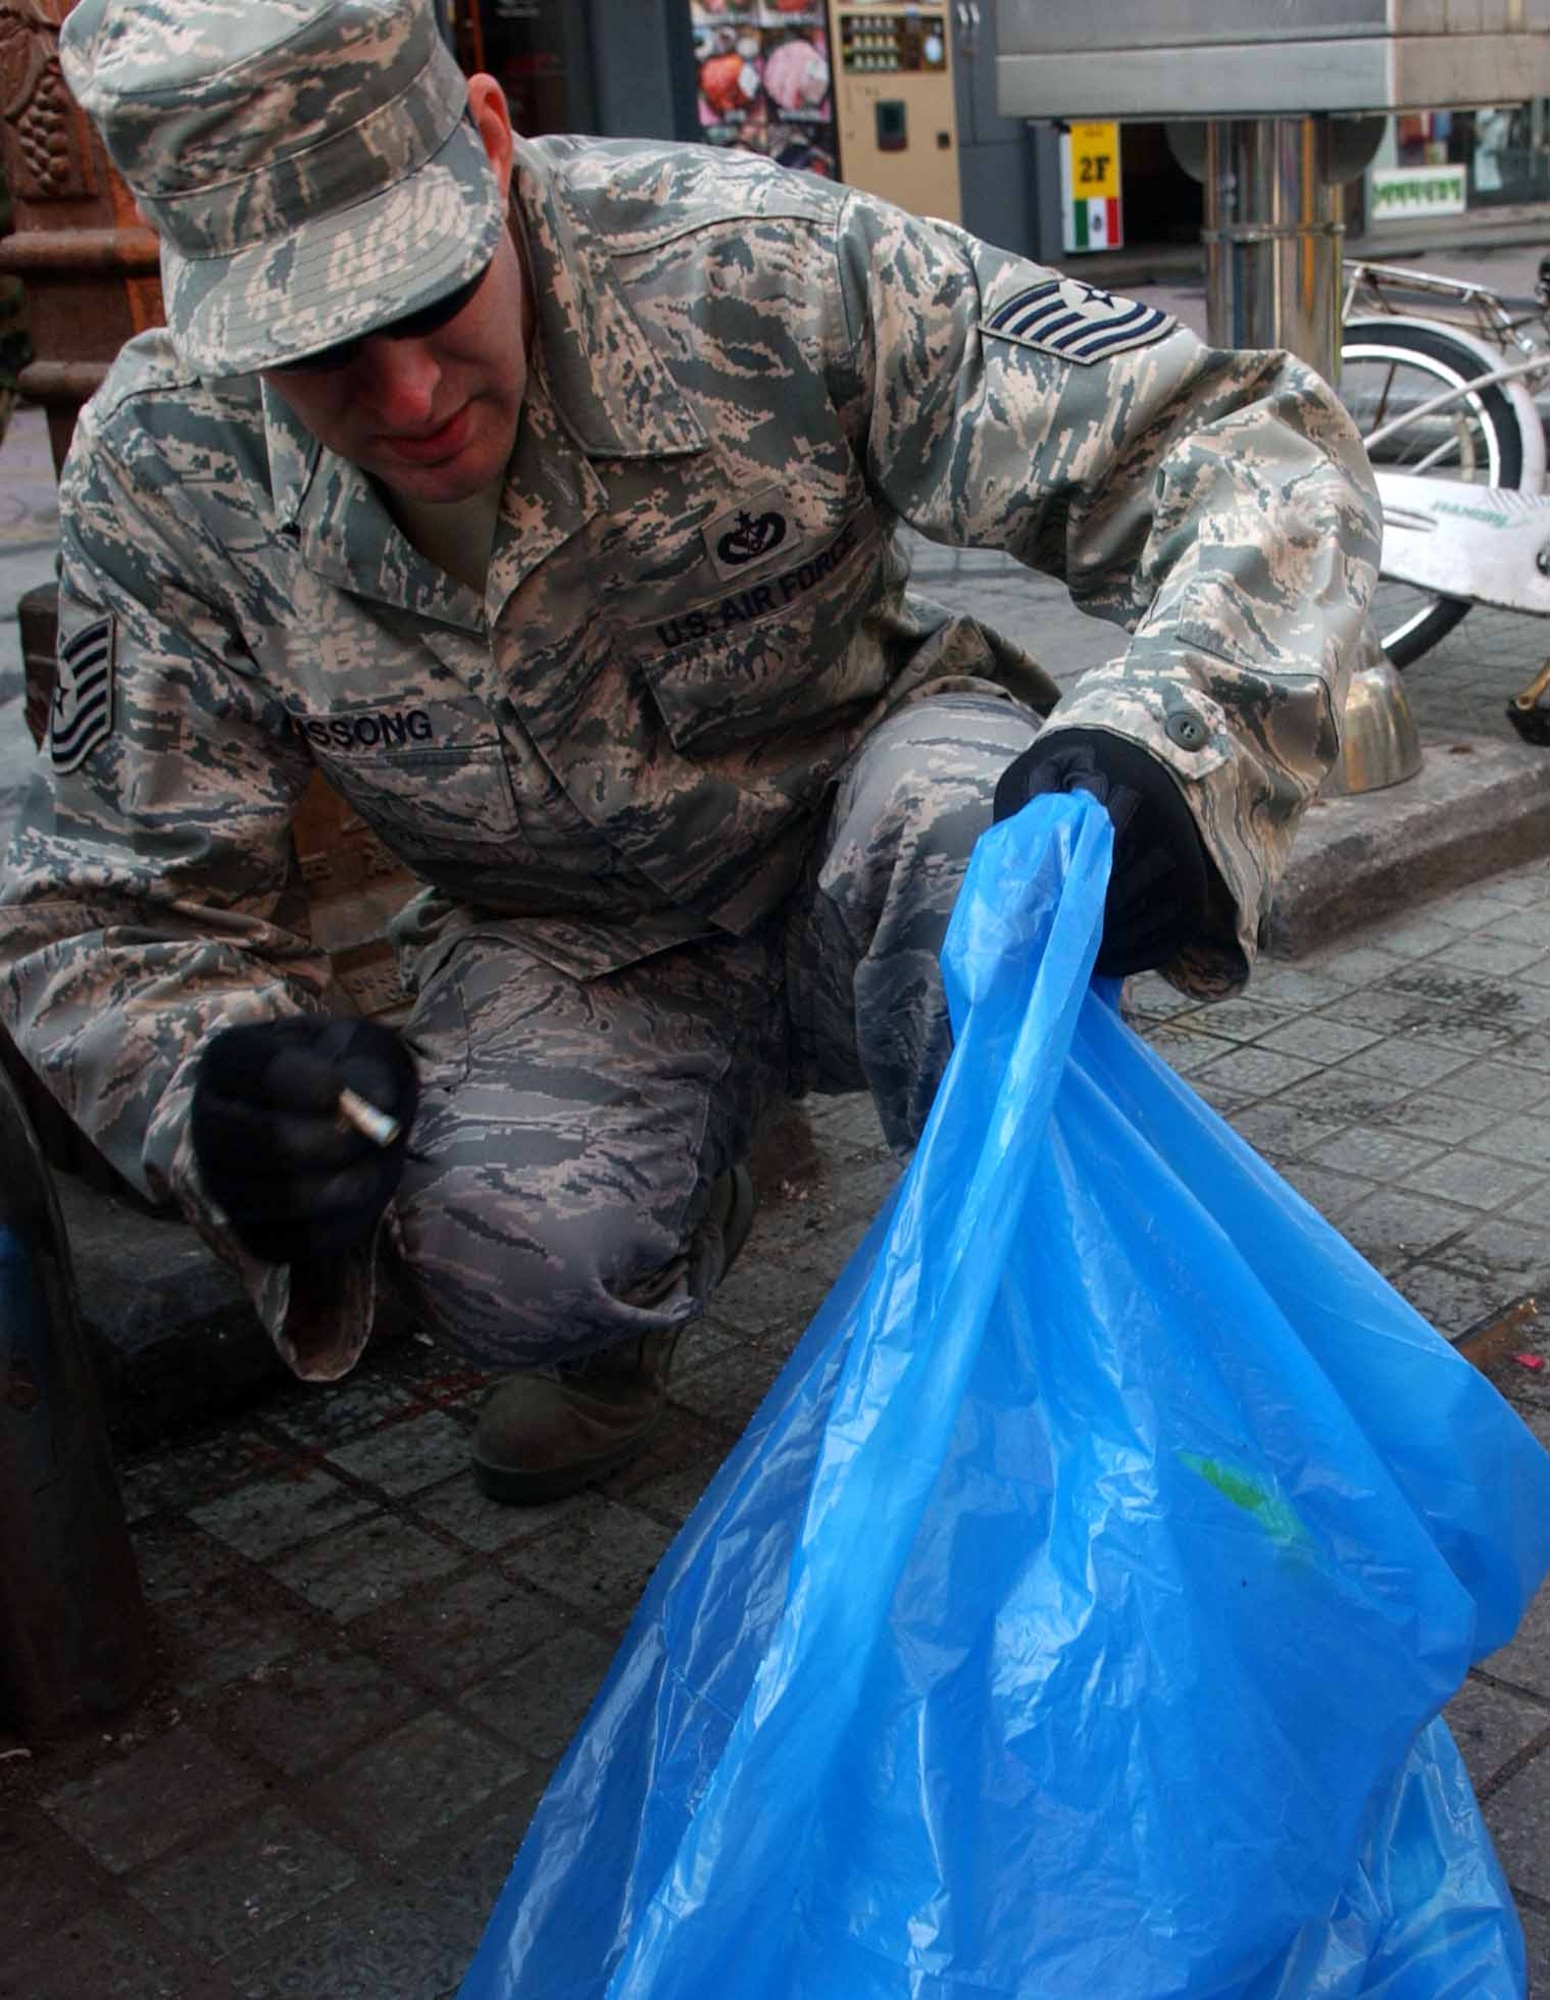 OSAN AIR BASE, Republic of Korea -- Tech. Sgt. David Hissong, 51st Civil Engineer Squadron, places debris into his garbage bag during a clean-up of the shopping mall outside the main gate April 3. The clean-up was part of Osan's Earth Day/Arbor Day celebrations. (U.S. Air Force photo/Staff Sgt. Candy Knight)